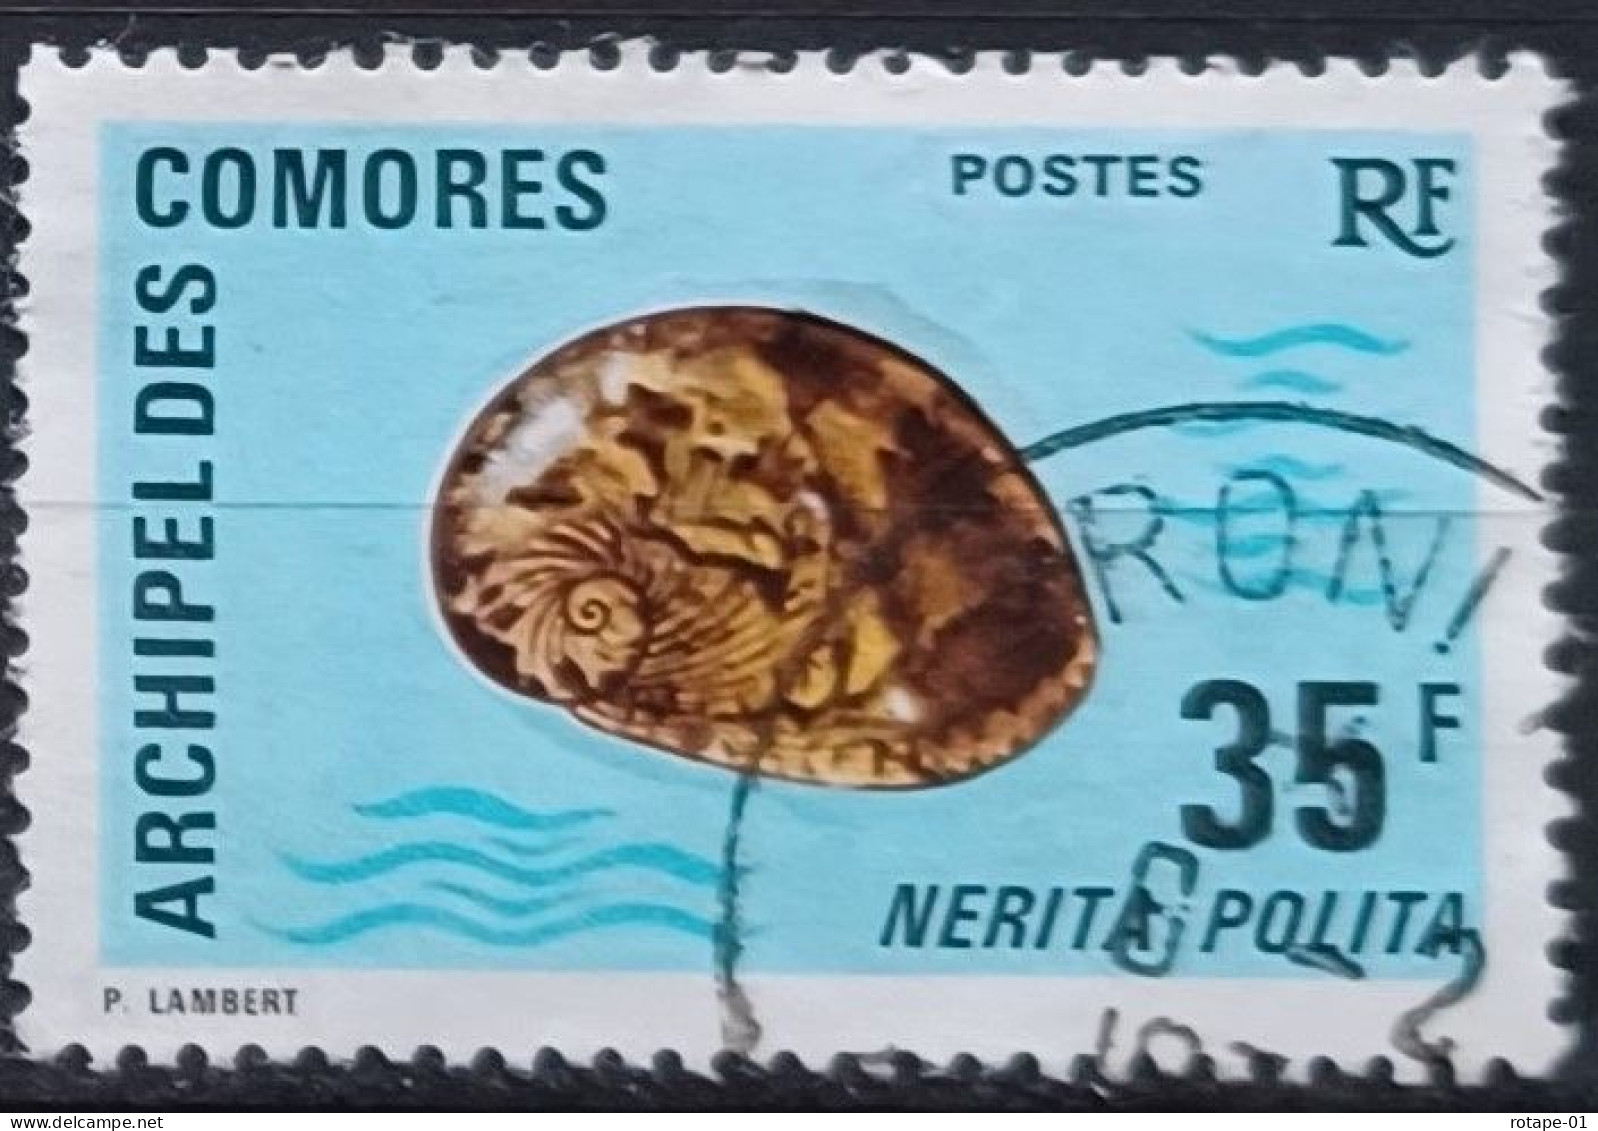 Comores  1971,  YT N°75  O,  Cote YT 3,5€ - Used Stamps